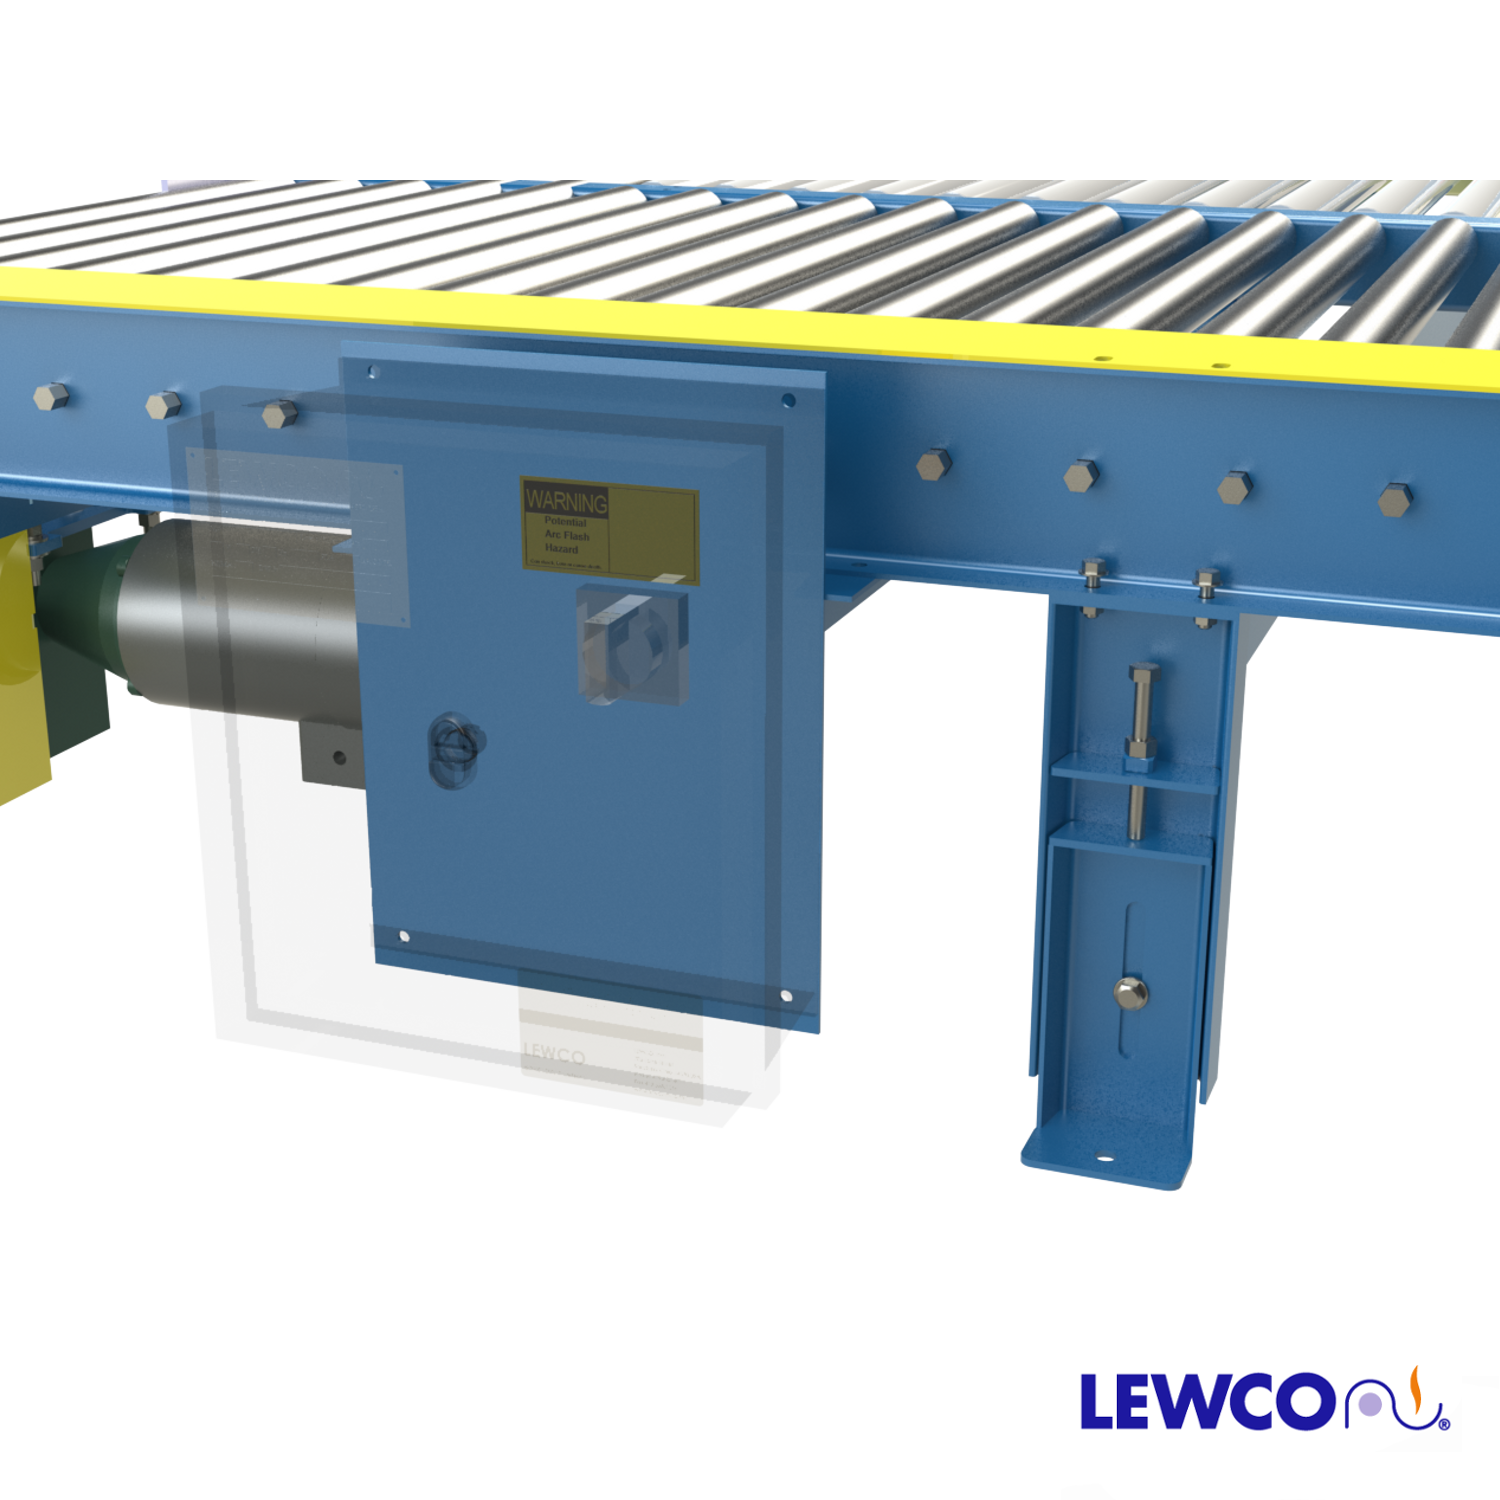 Chain Driven Live Roller Conveyor With Frame Mounted Motor Control